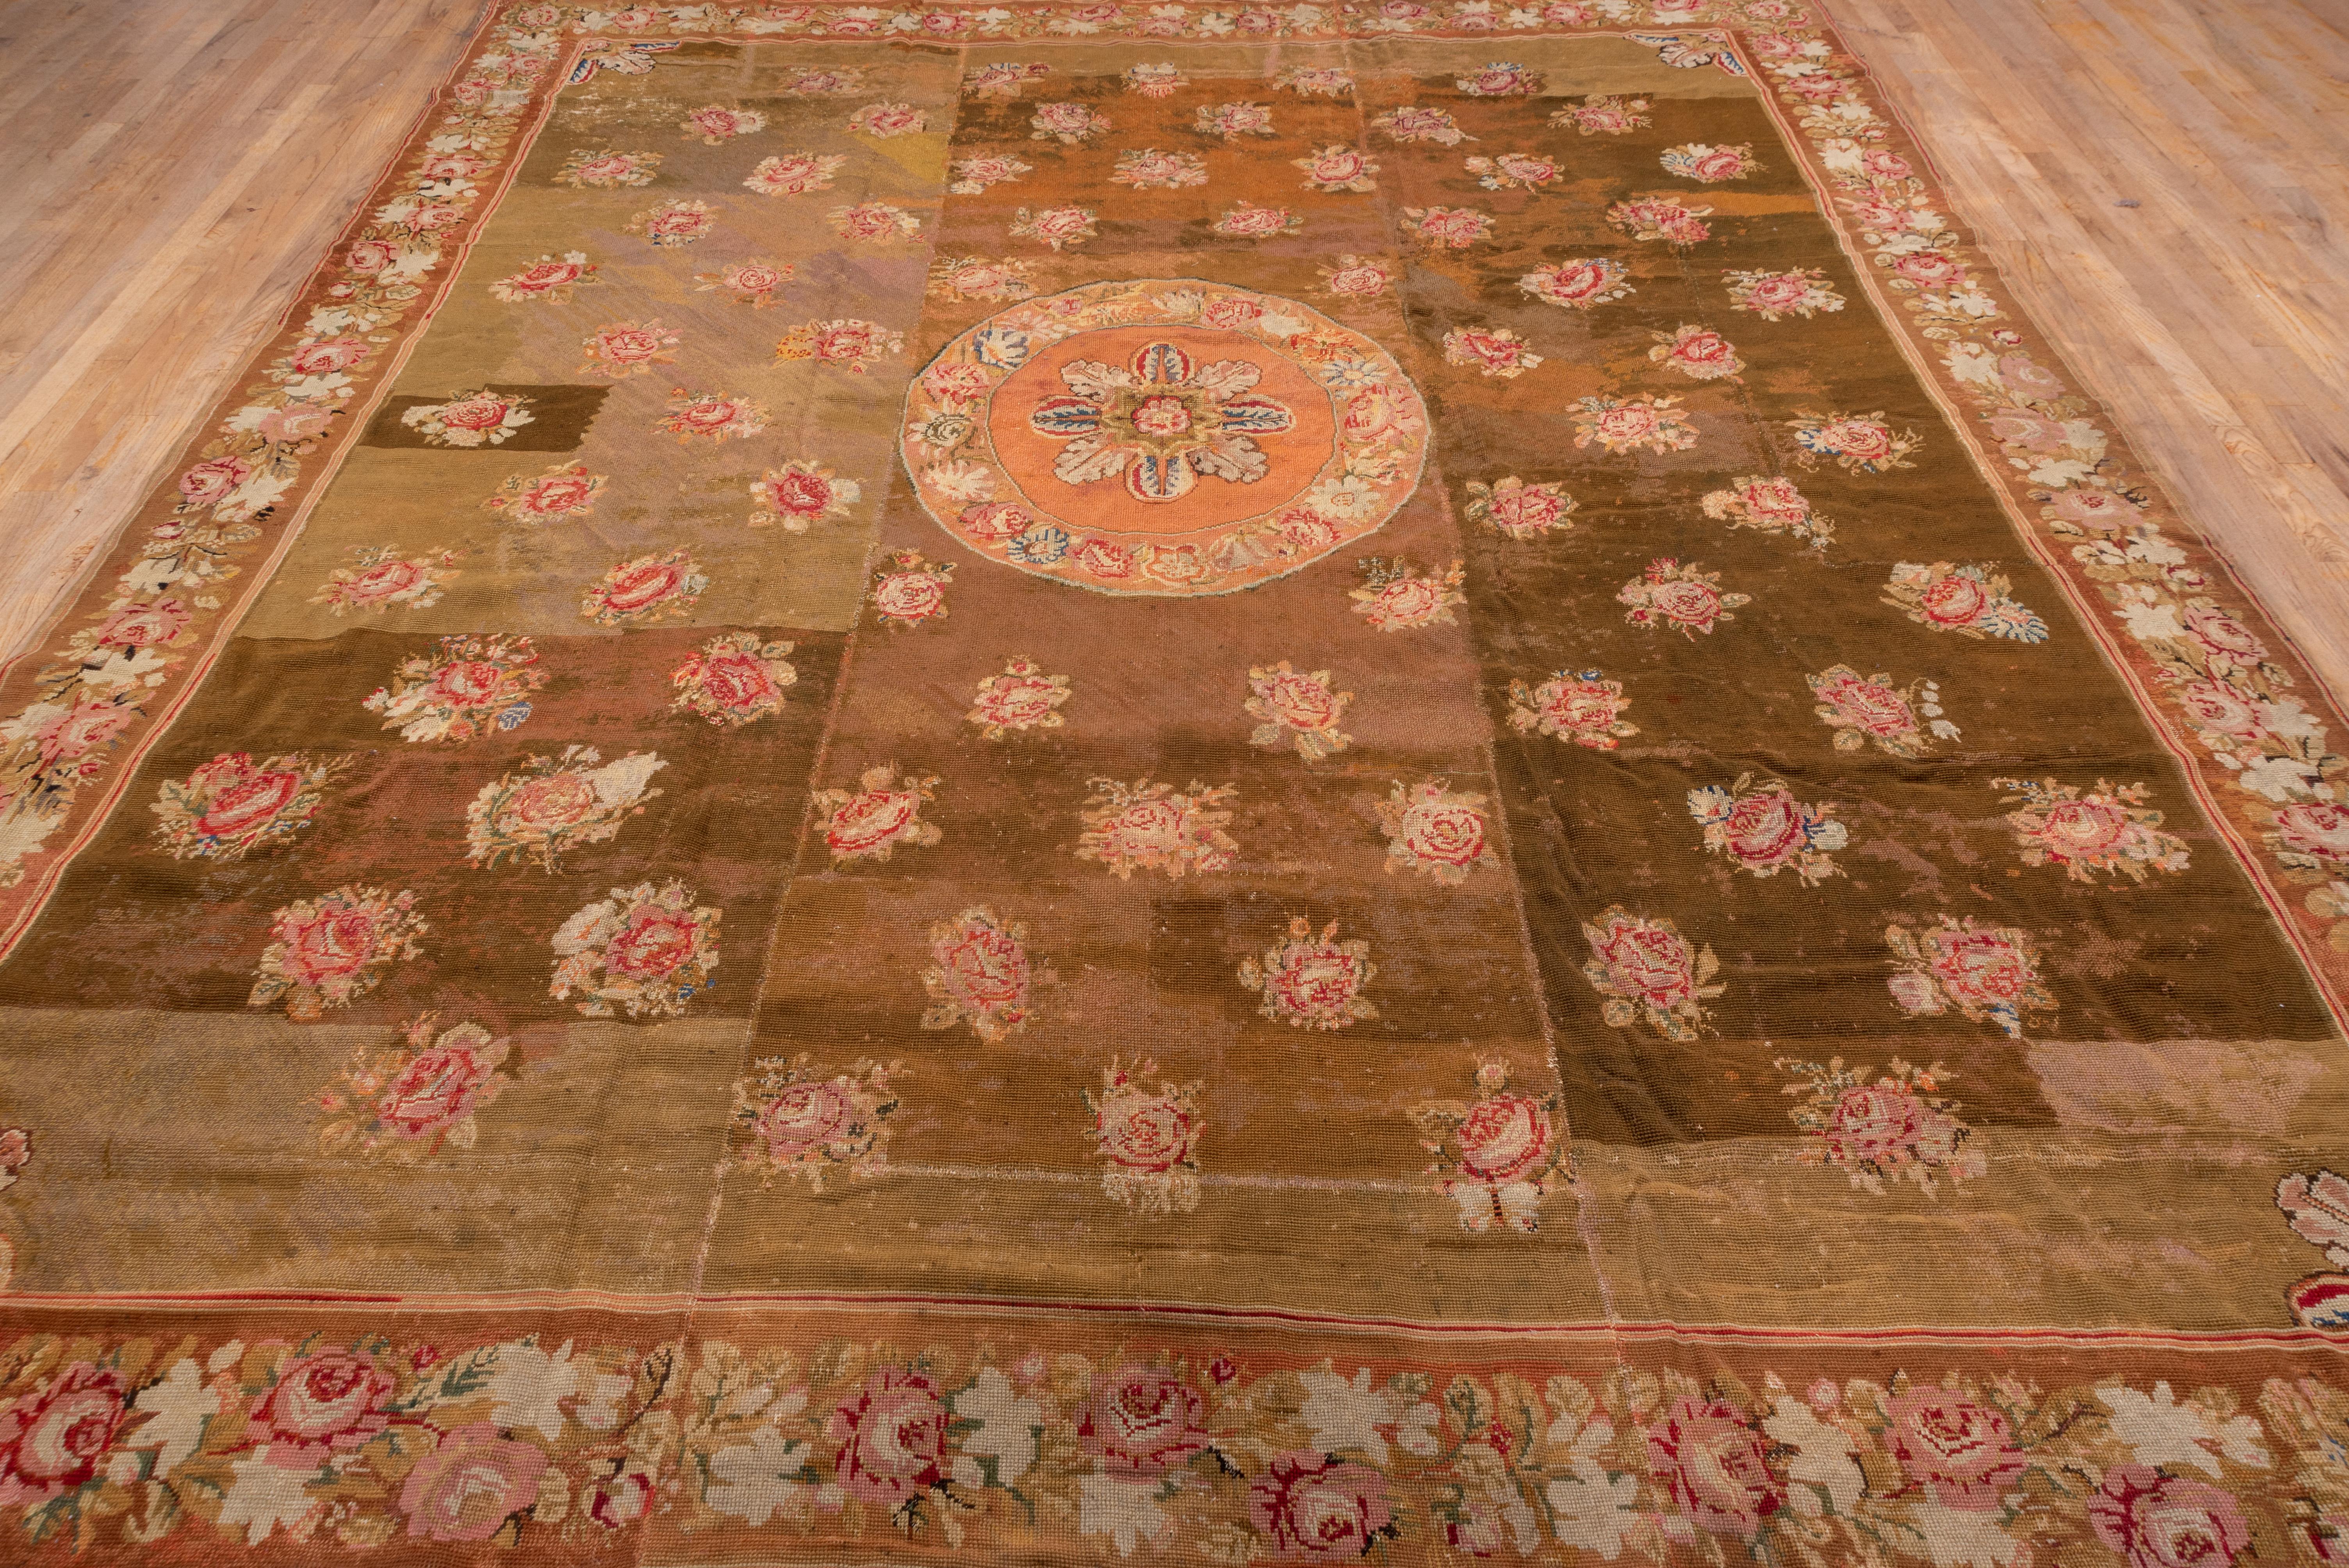 Antique French Needlepoint Carpet, Brown Field, Pink Borders In Fair Condition For Sale In New York, NY